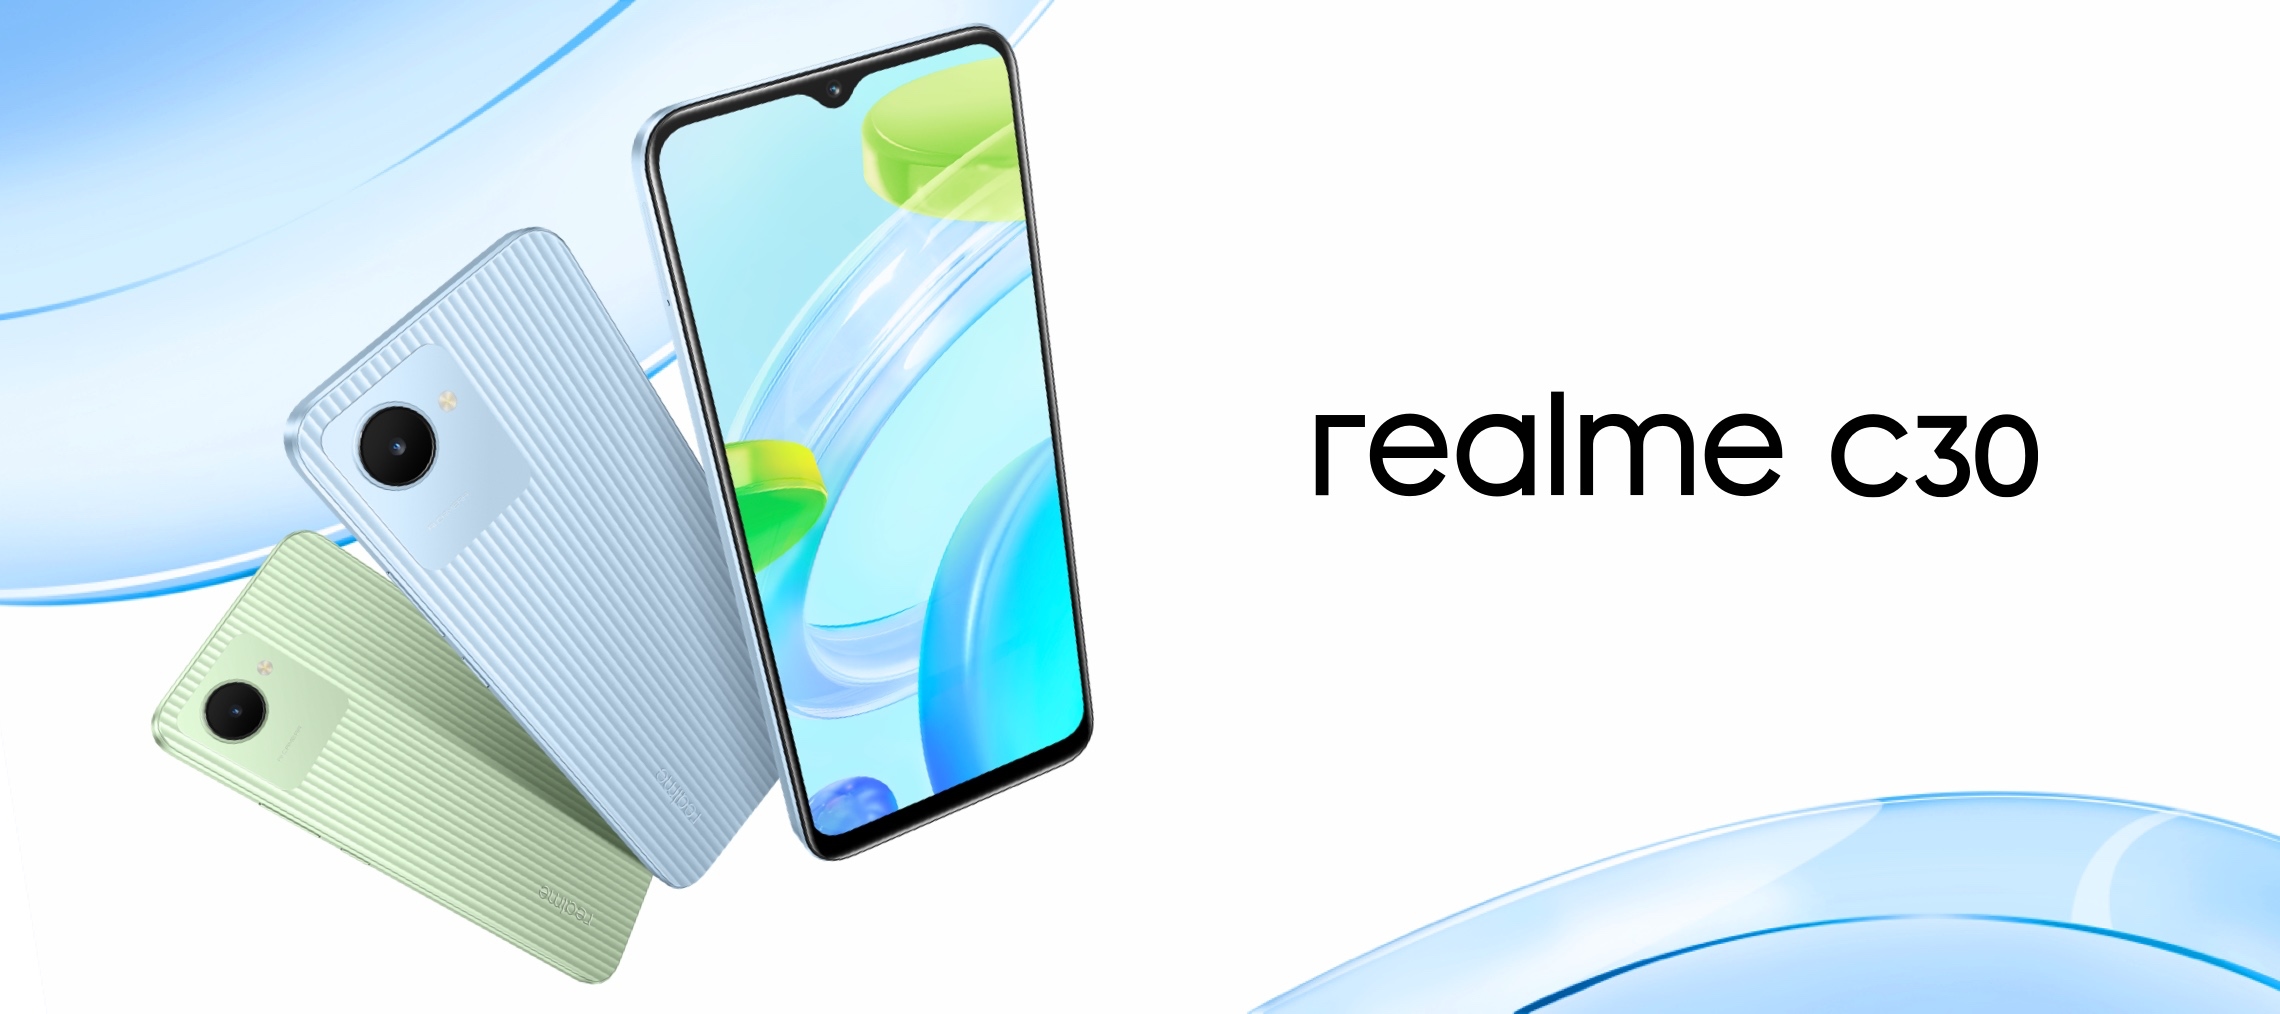 Realme C30 budget smartphone unveiled with 5000 mAh battery and $100 price tag